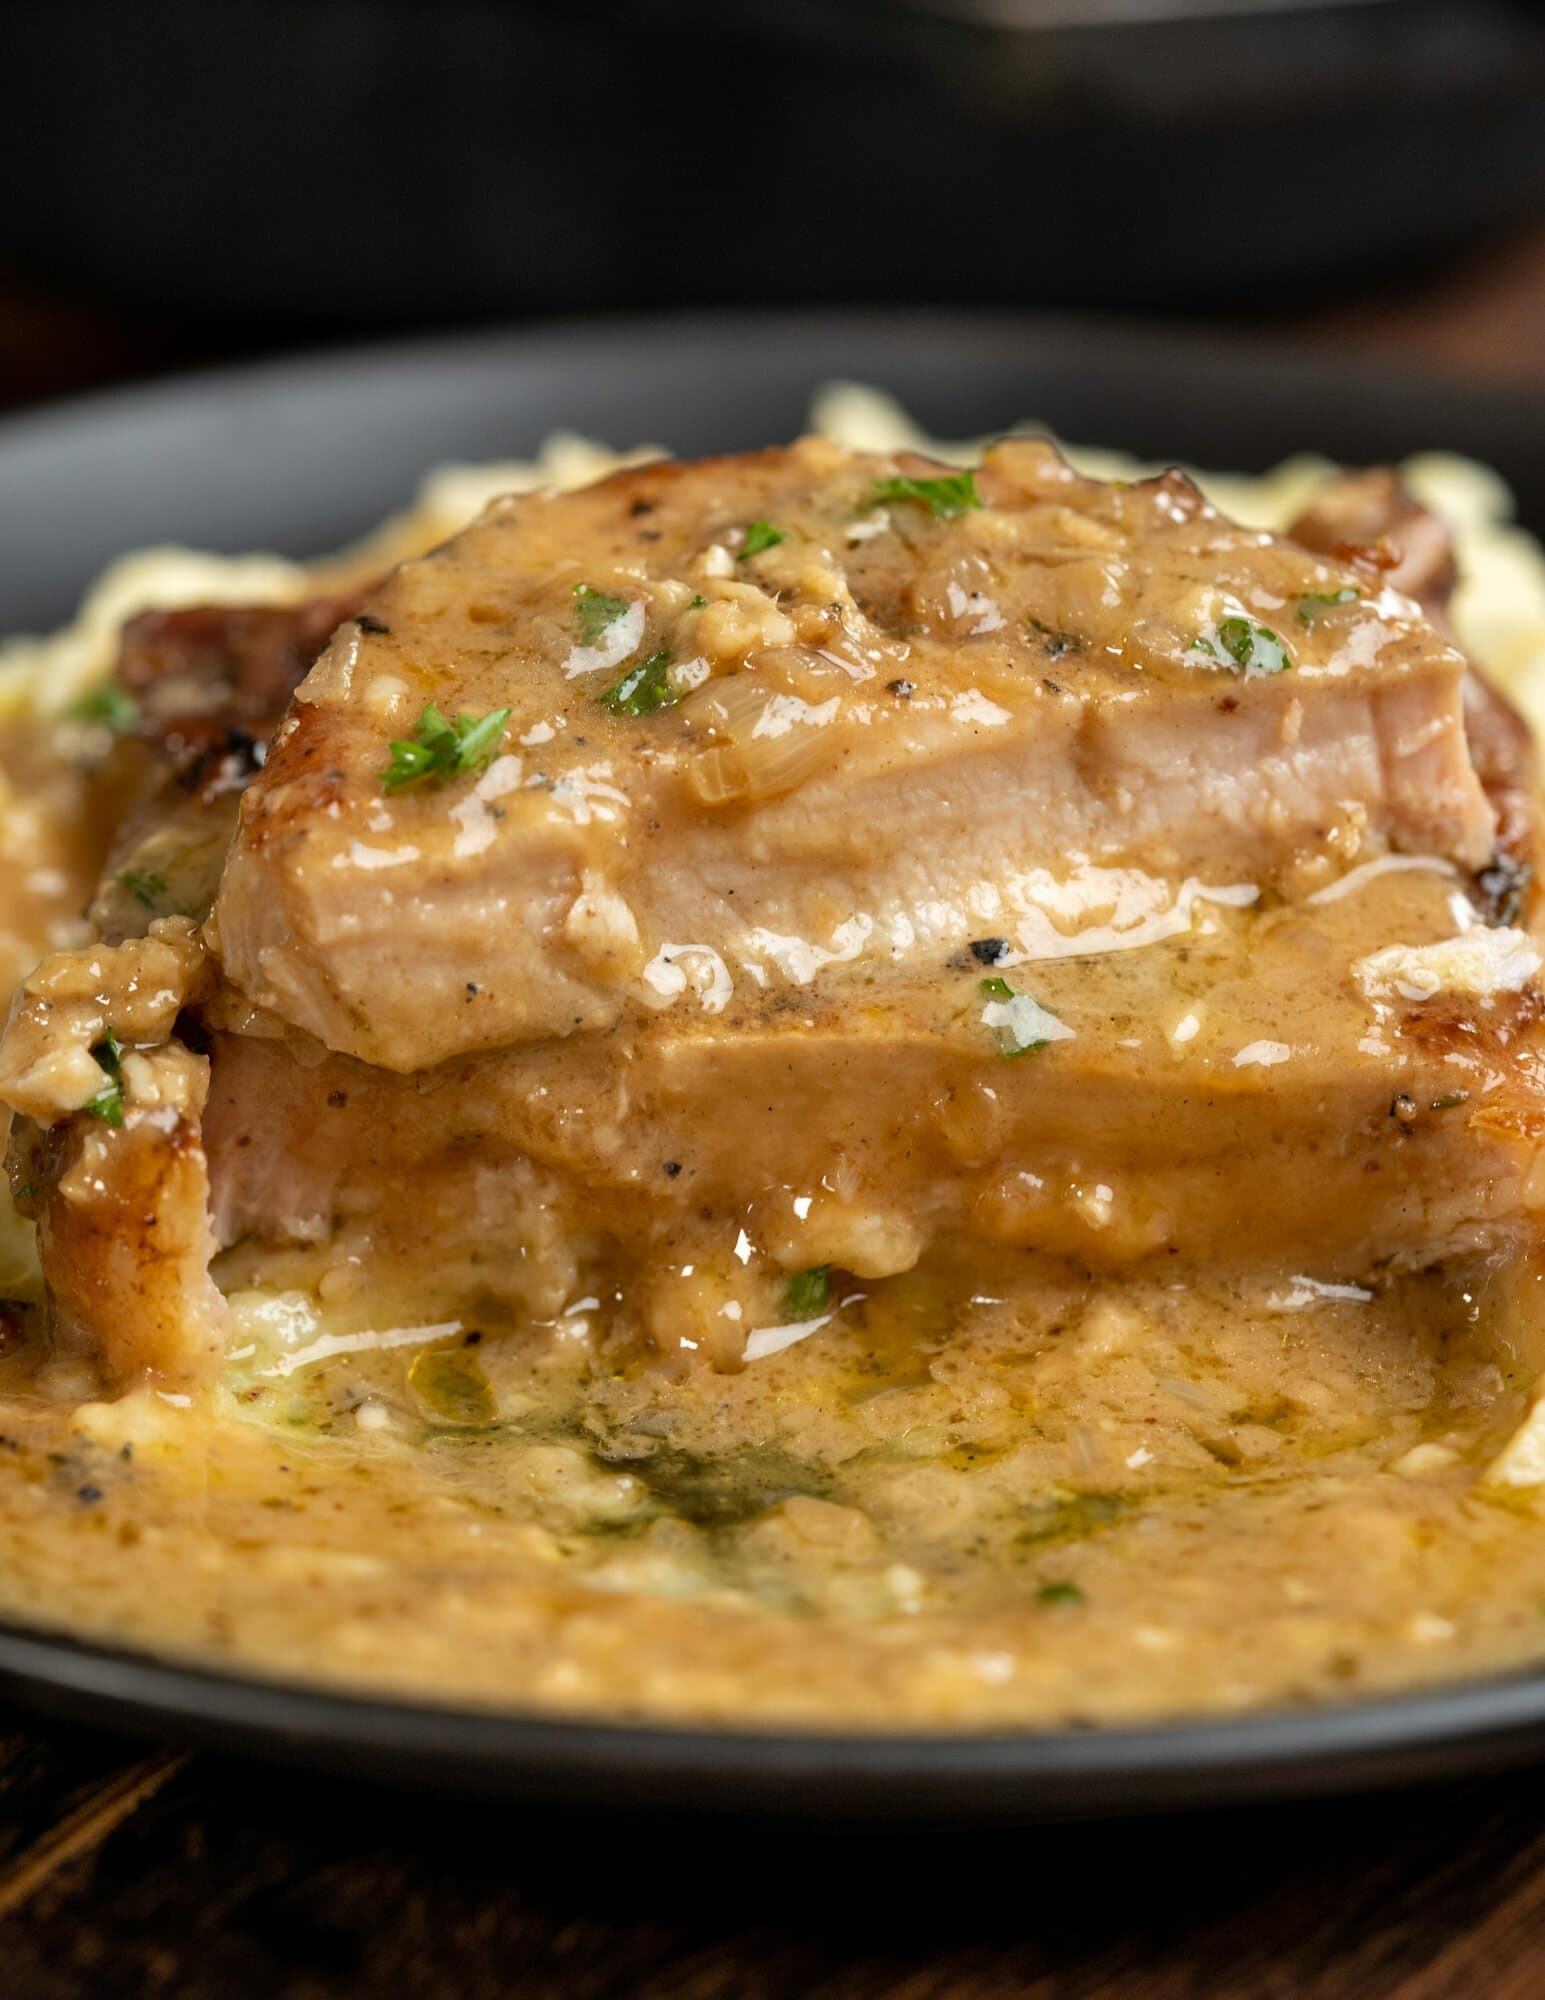 Light pink inside of cut pork chops, seared in a skillet and served with a sour cream gravy